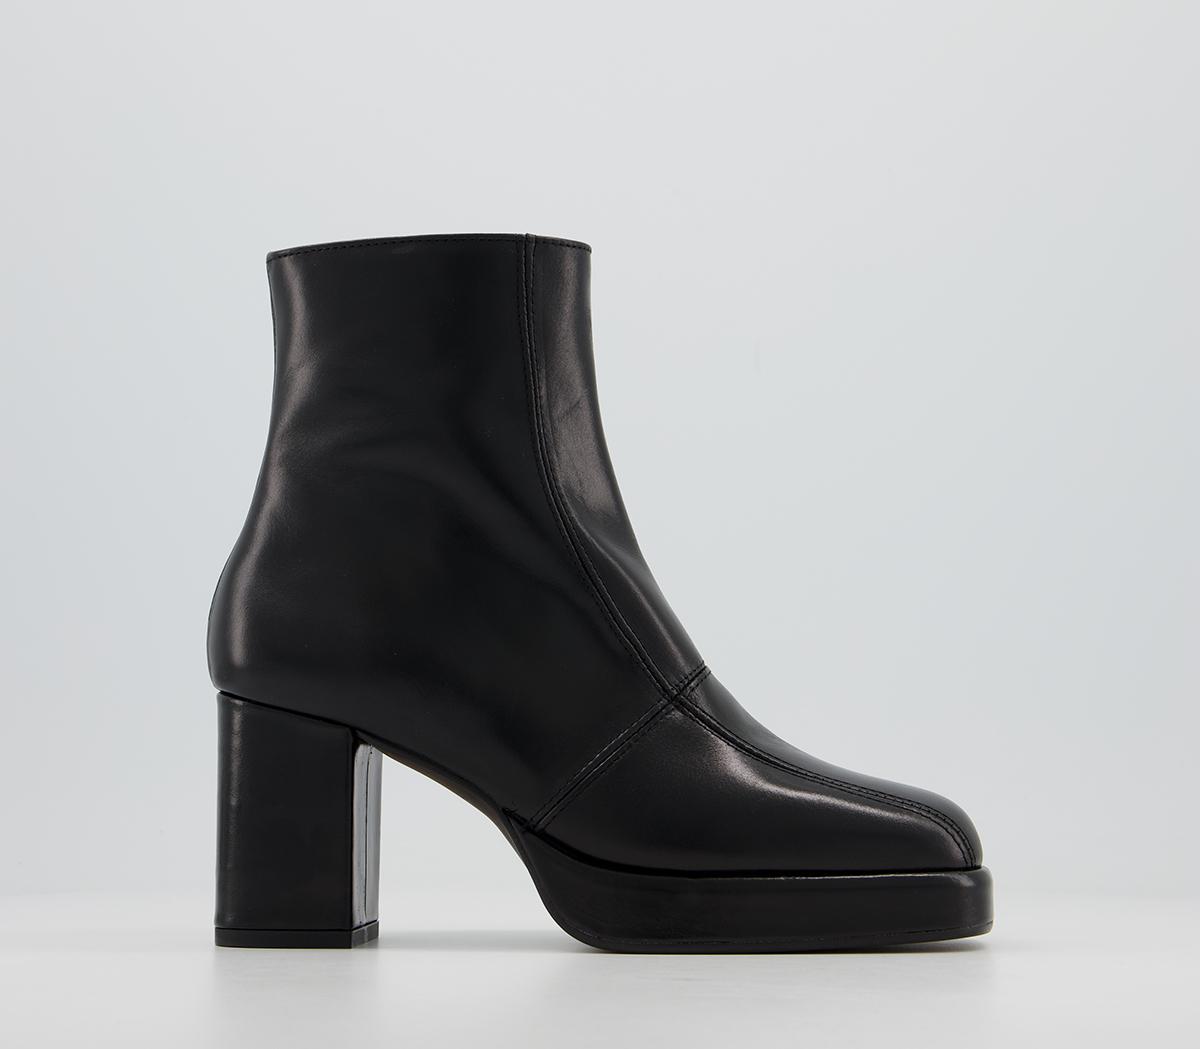 OFFICE Adele Platform Ankle Boots Black Leather - Women's Ankle Boots